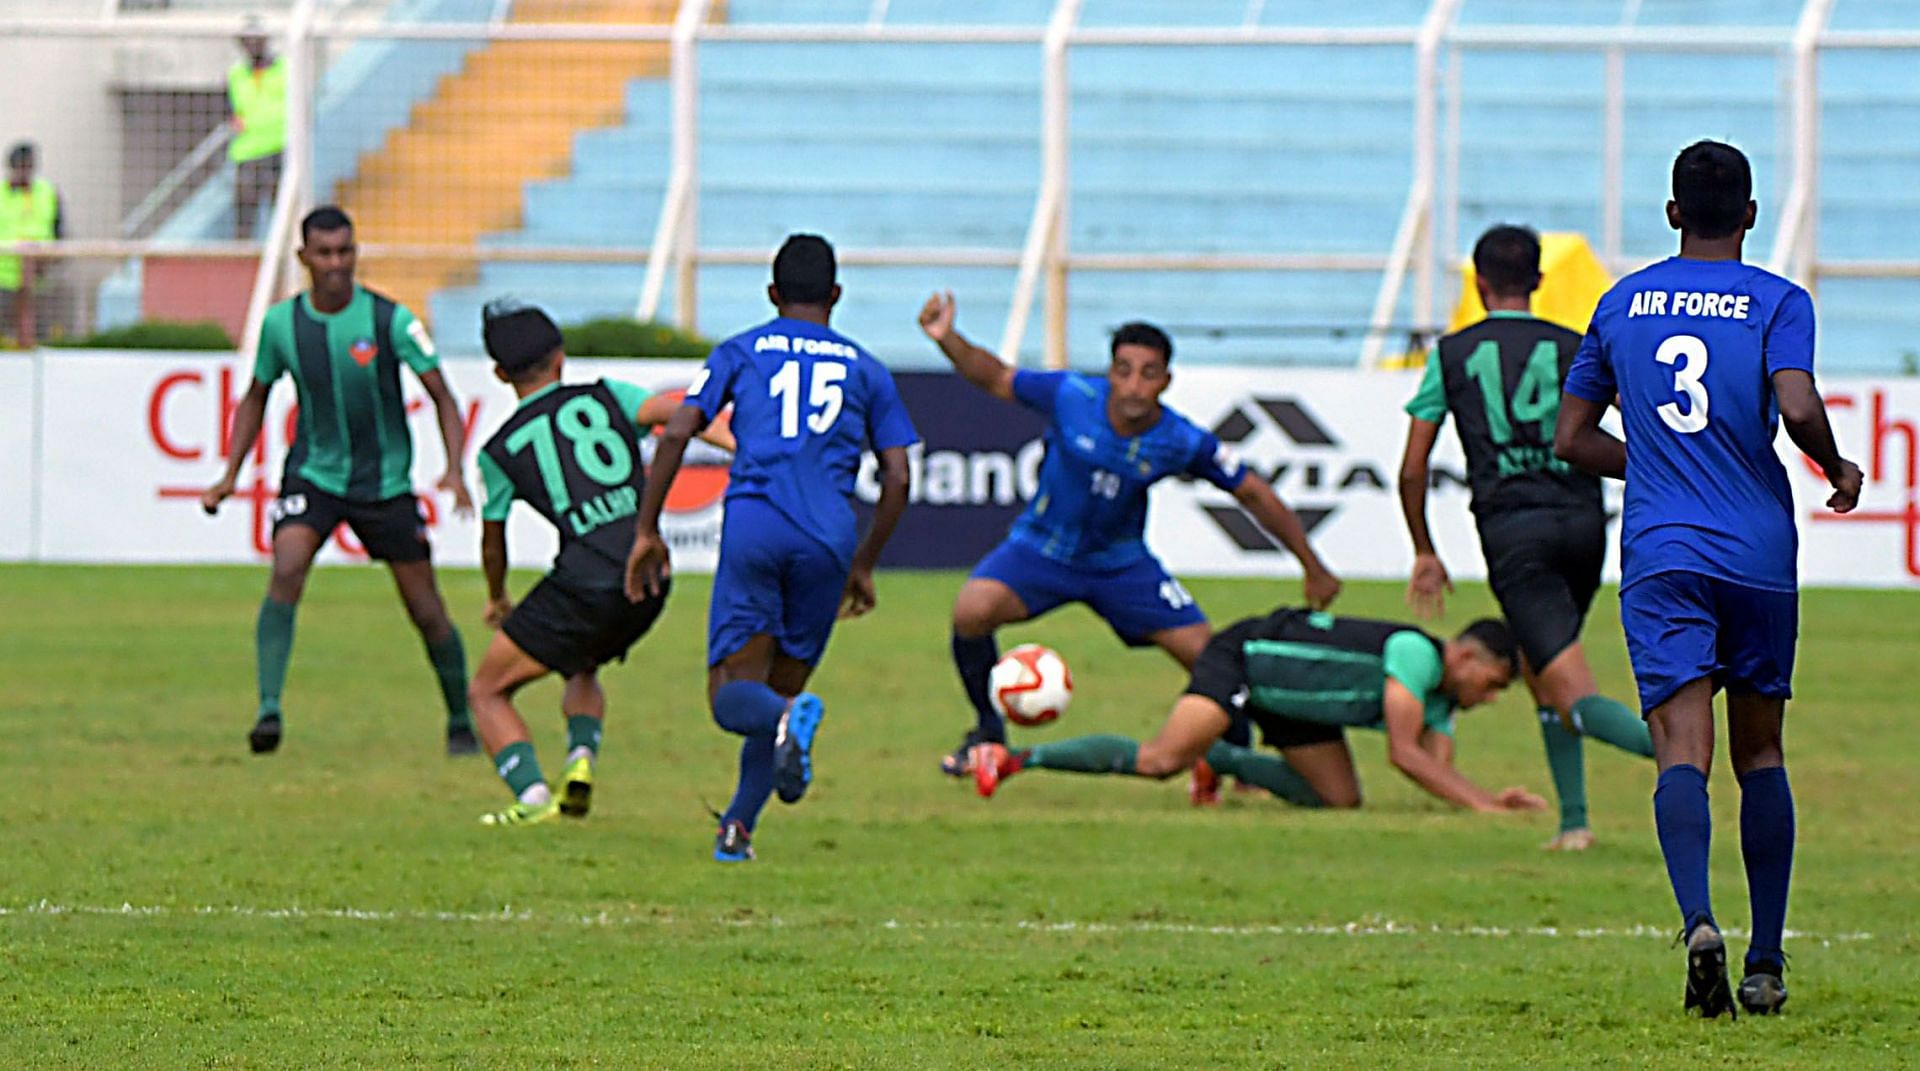 FC Goa won a feisty encounter against Indian Air Force FT. [Credits: Image R]